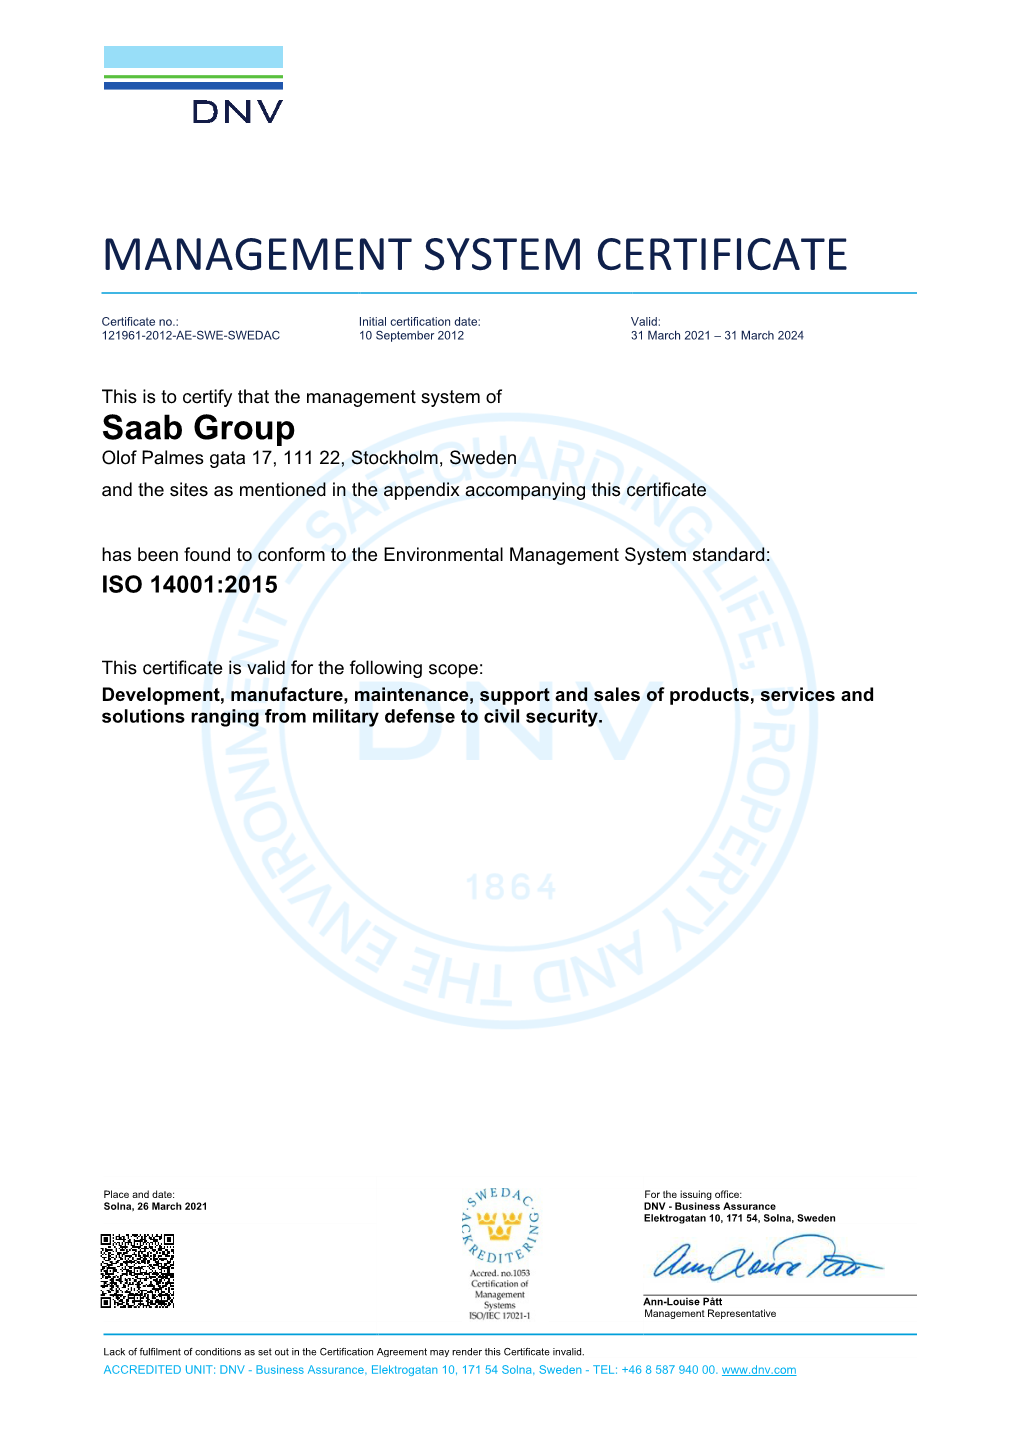 Saab Group Olof Palmes Gata 17, 111 22, Stockholm, Sweden and the Sites As Mentioned in the Appendix Accompanying This Certificate